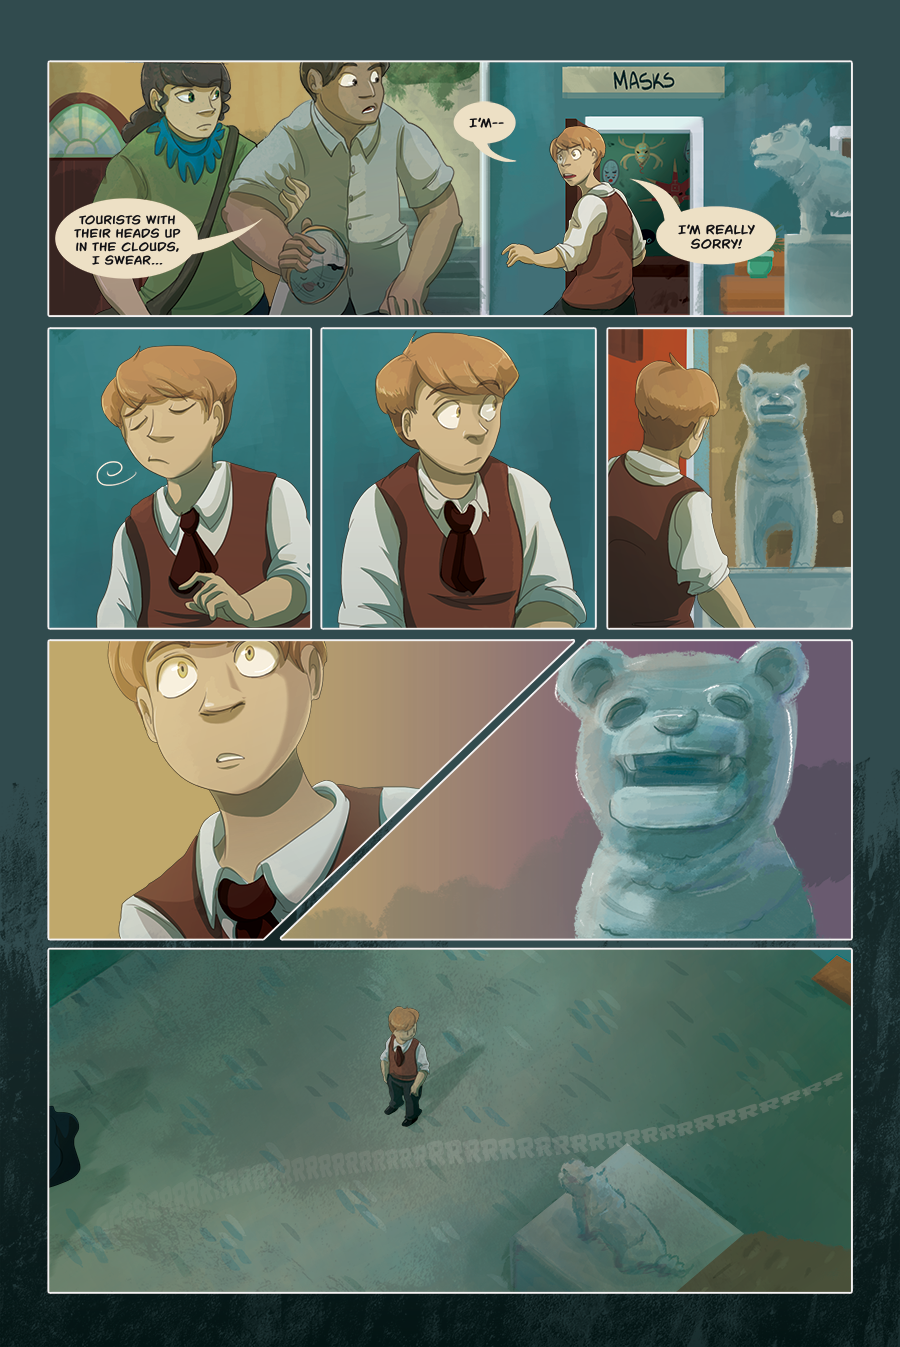 Chapter 5, prologue page 2